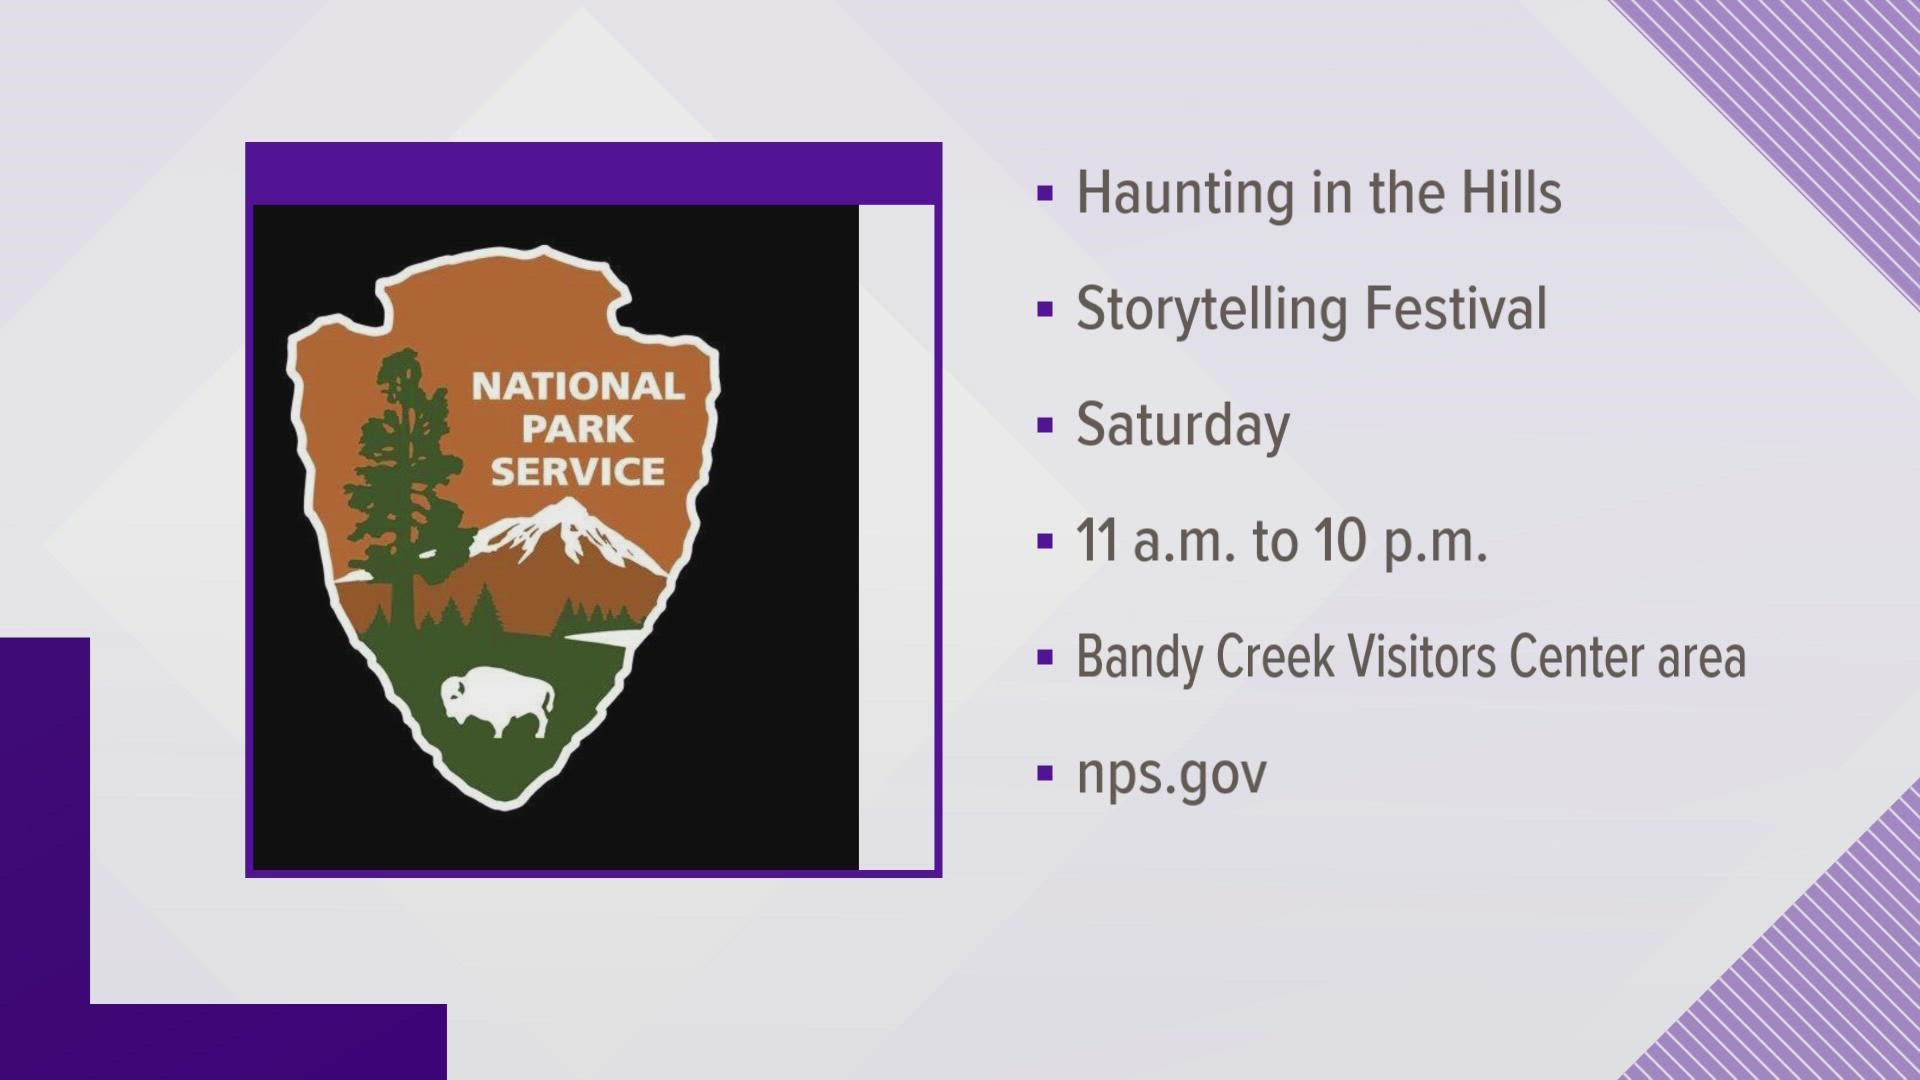 The  30th Annual Haunting in the Hills storytelling festival is Sept. 17, 11 a.m. to 10 p.m. at the Bandy Creek Visitor Center area at Big South Fork. Sept. 13, 2022